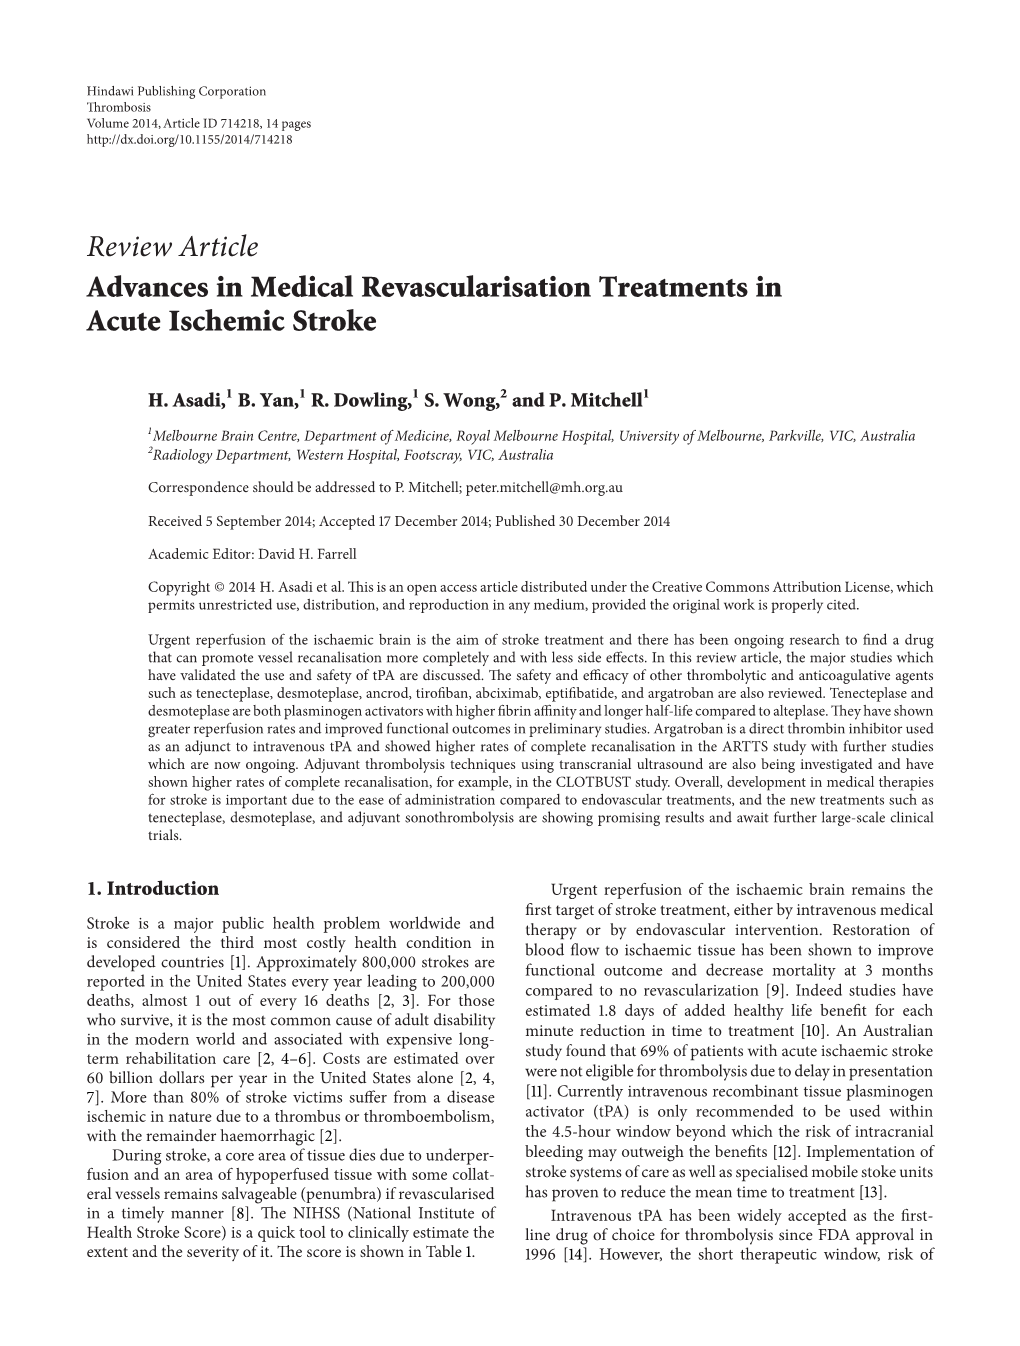 Review Article Advances in Medical Revascularisation Treatments in Acute Ischemic Stroke